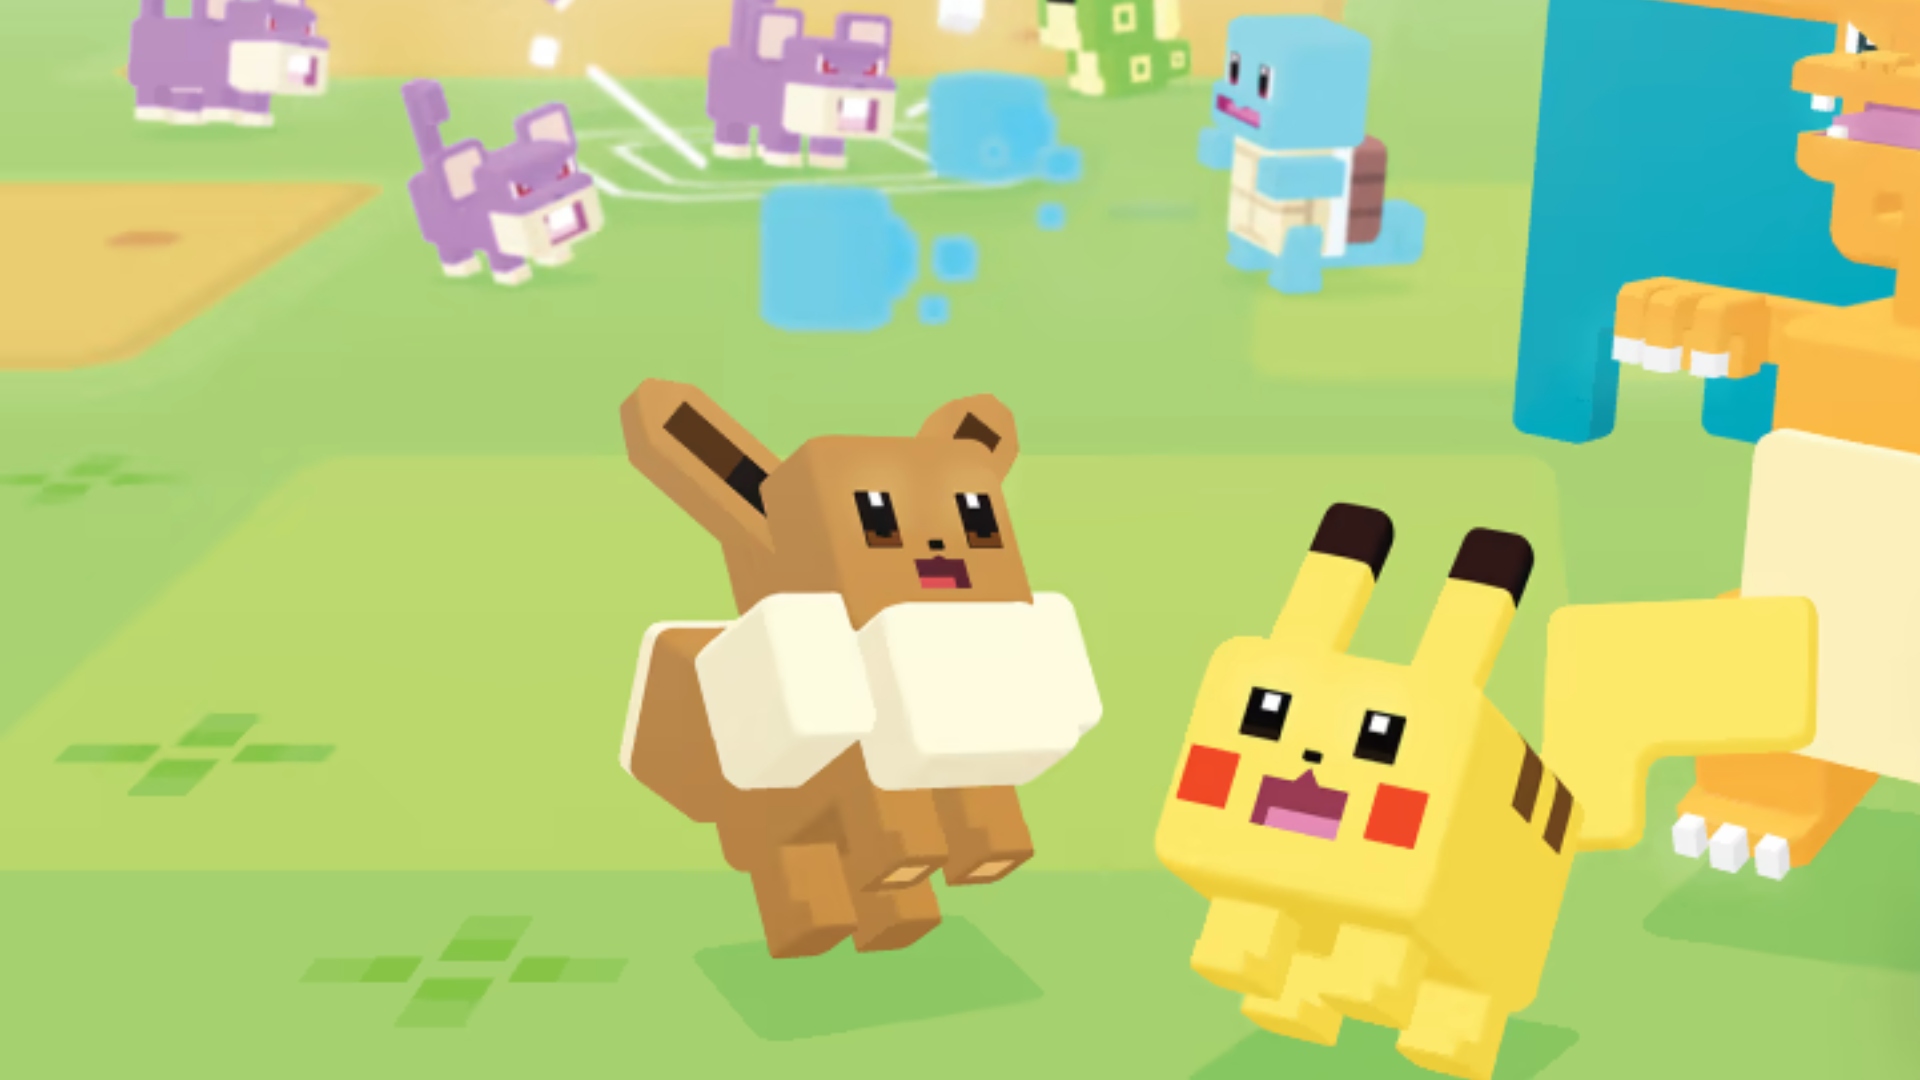 Pokémon Switch games: image shows an Eevee, Pikachu and Charizard in Pokémon Quest, all of them presented in Pokéxel style.